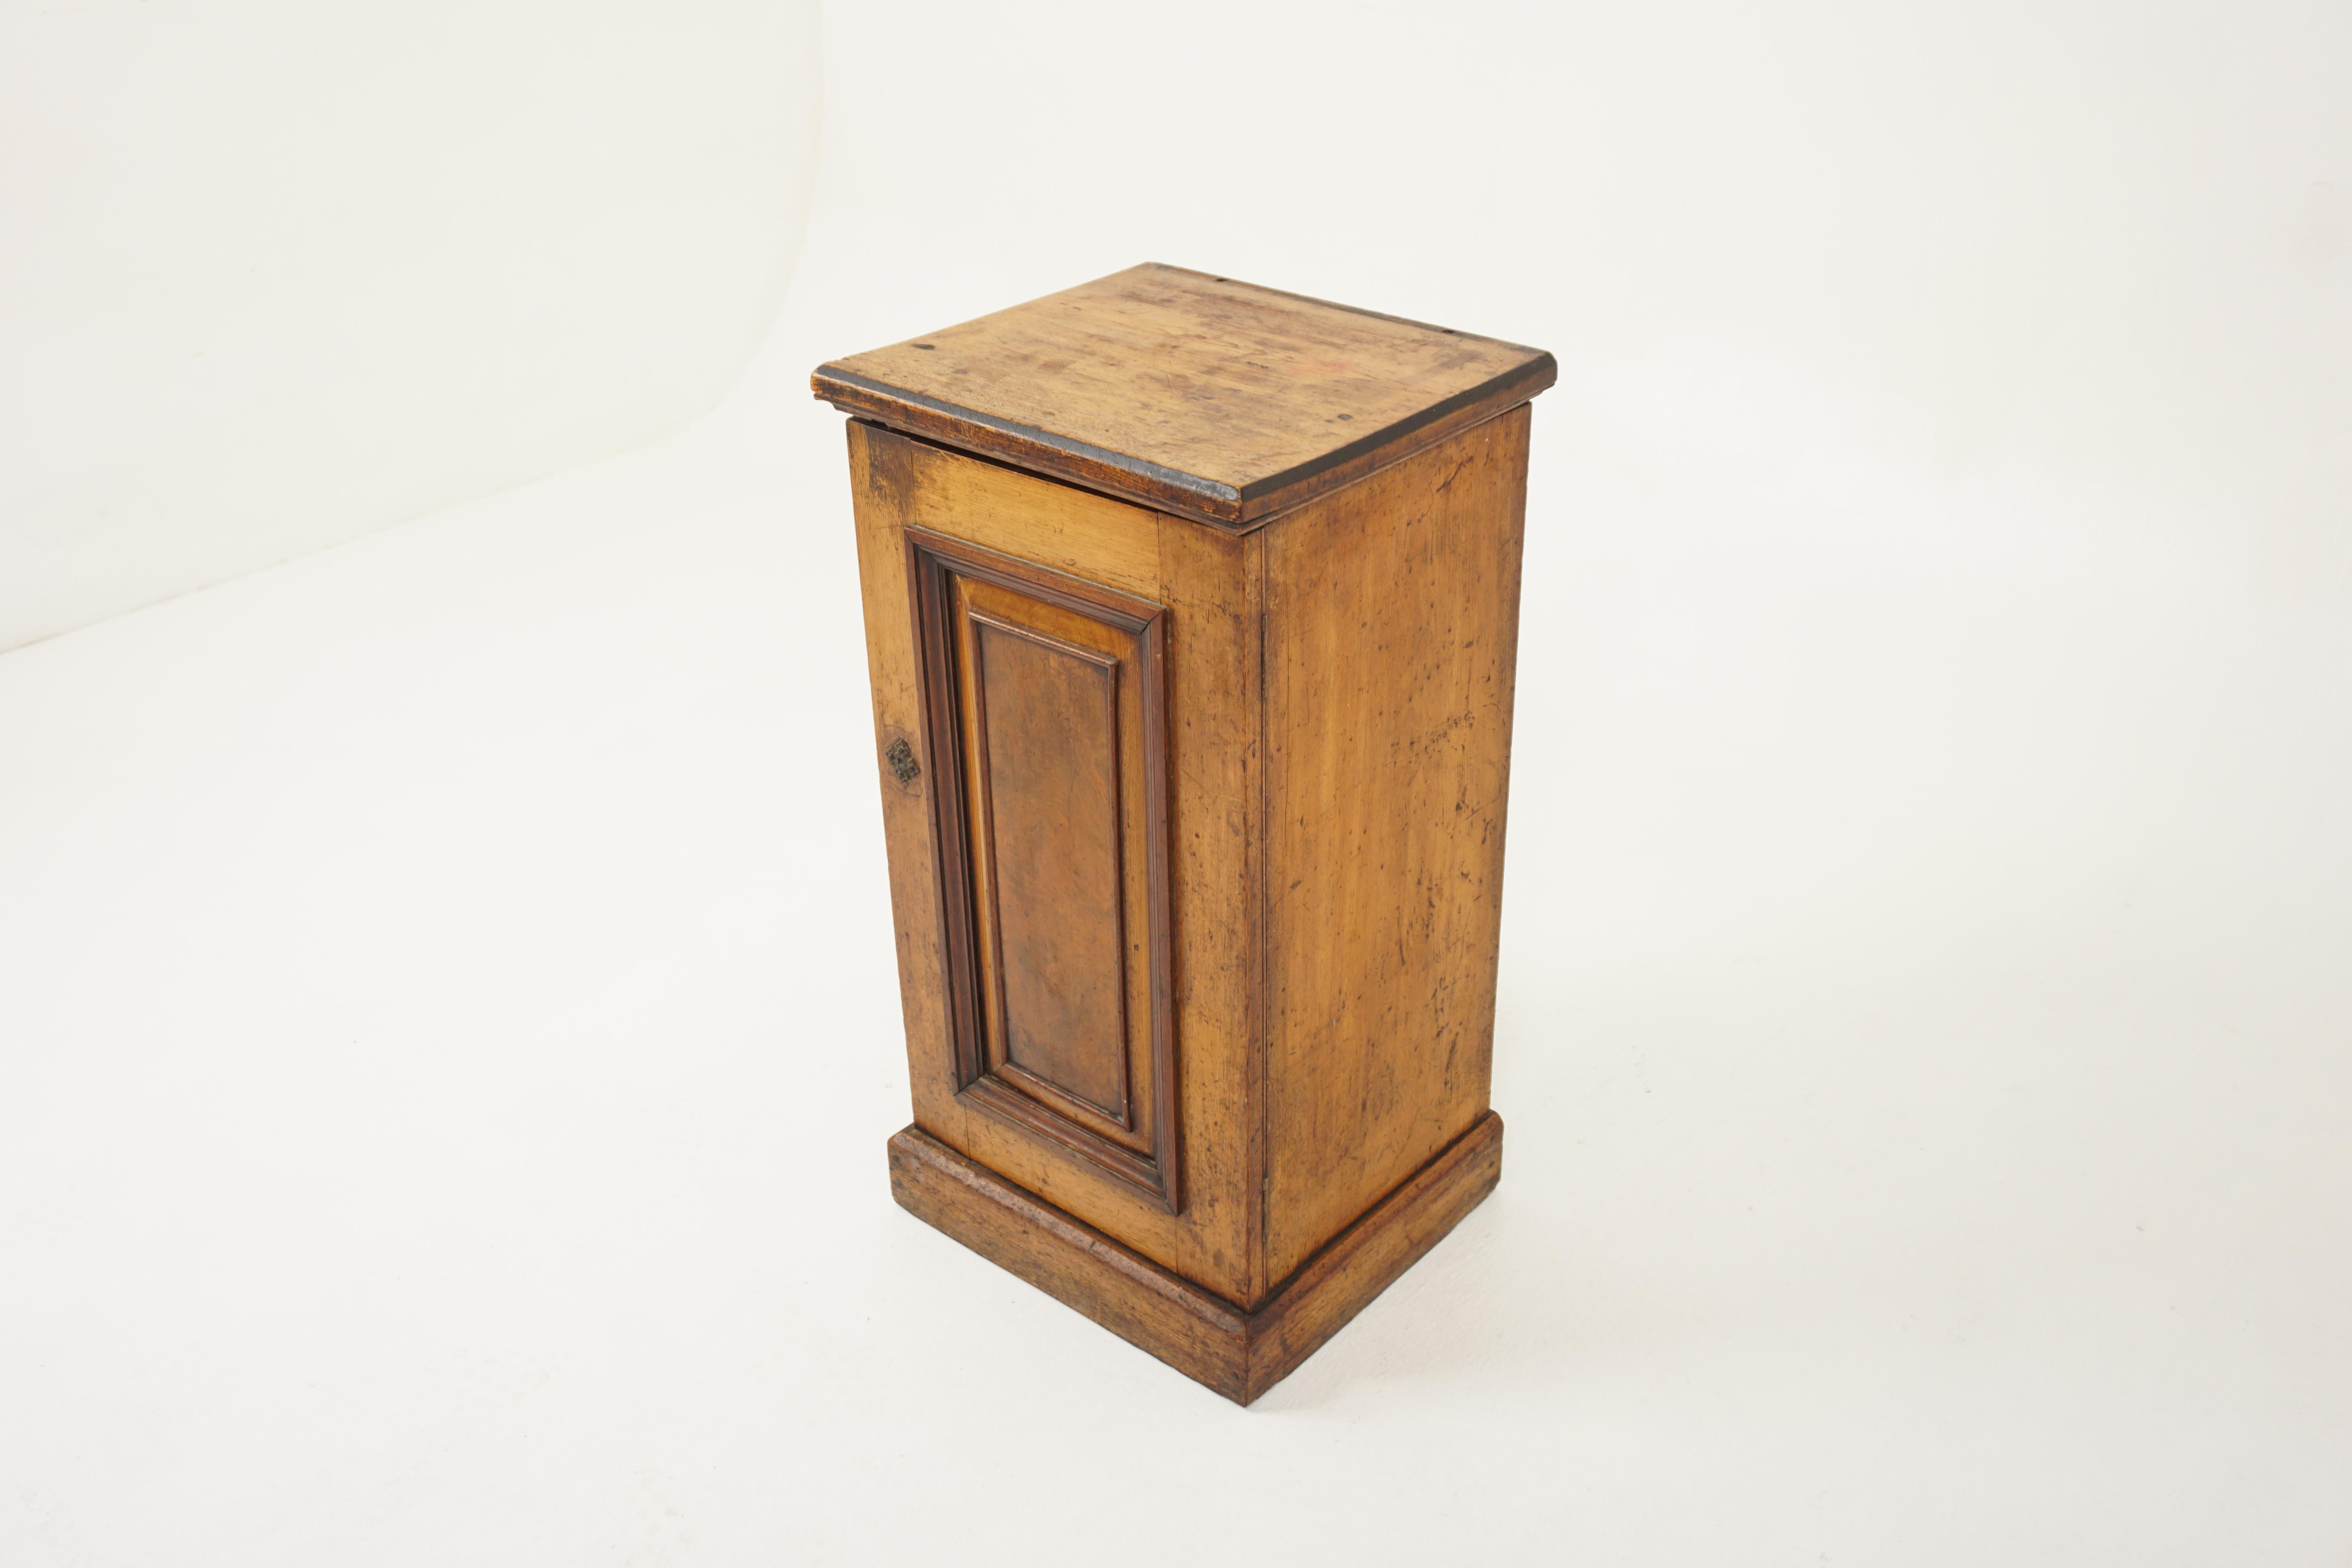 Antique Victorian Pitch Pine nightstand, bedside, lamp table, Scotland 1880, H090

Scotland 1880
Solid Pitch Pine
Original Finish
Rectangular moulded top
Single panelled door with original brass handle
Opens to reveal single shelf
Standing on a